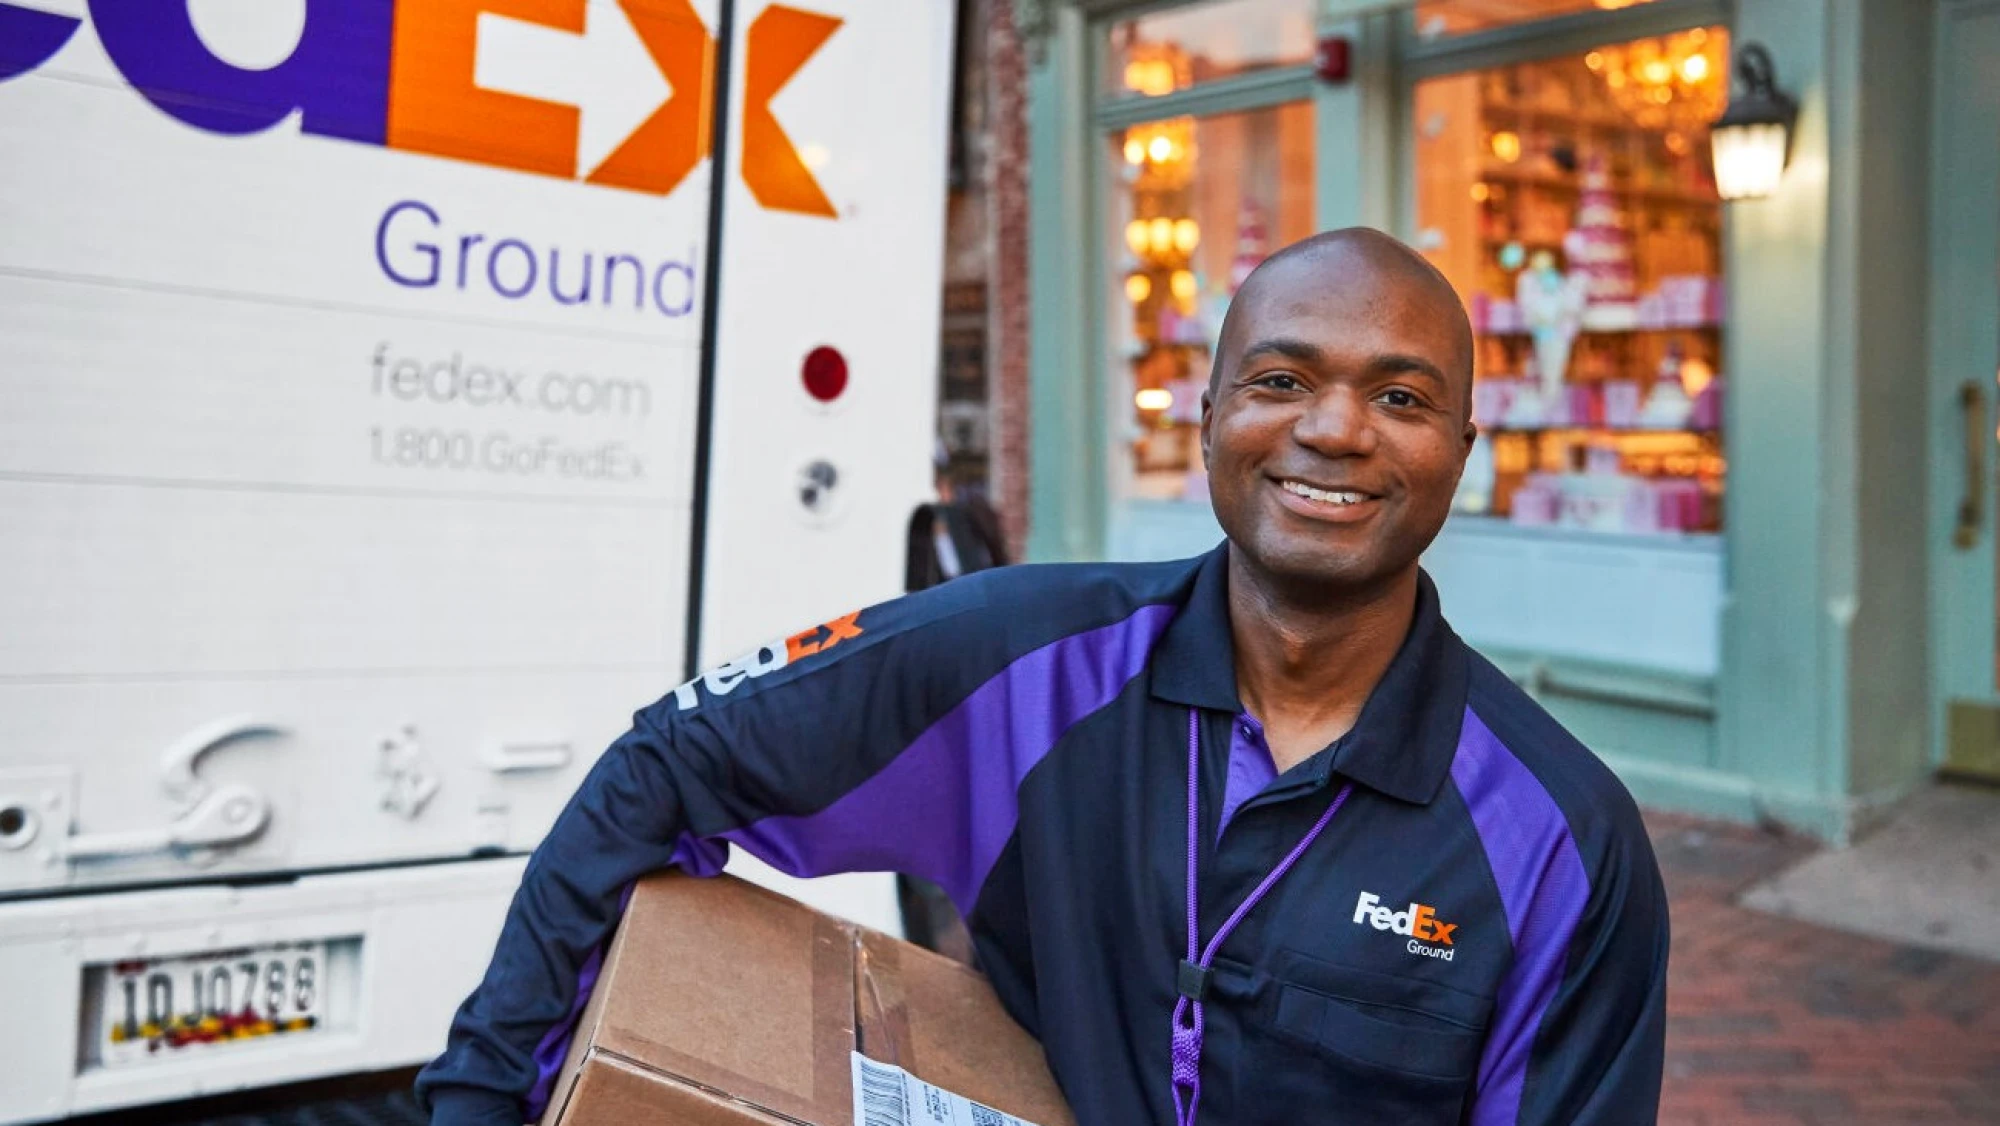 FedEx Earns No. 17 Spot on the Fortune World’s Most Admired Companies List